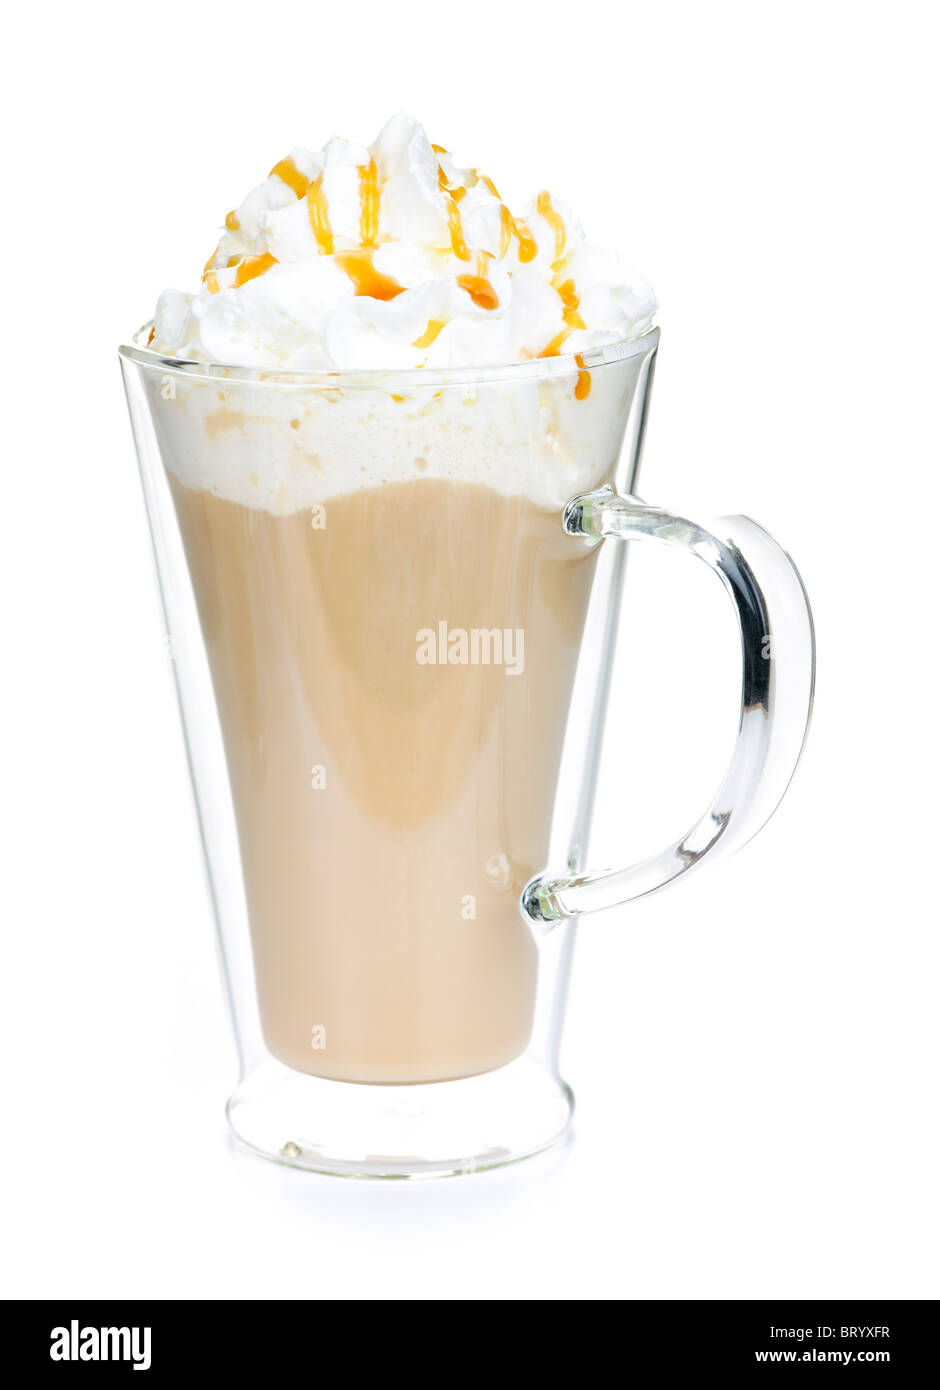 Caffe latte coffee with whipped cream isolated on white background Stock Photo